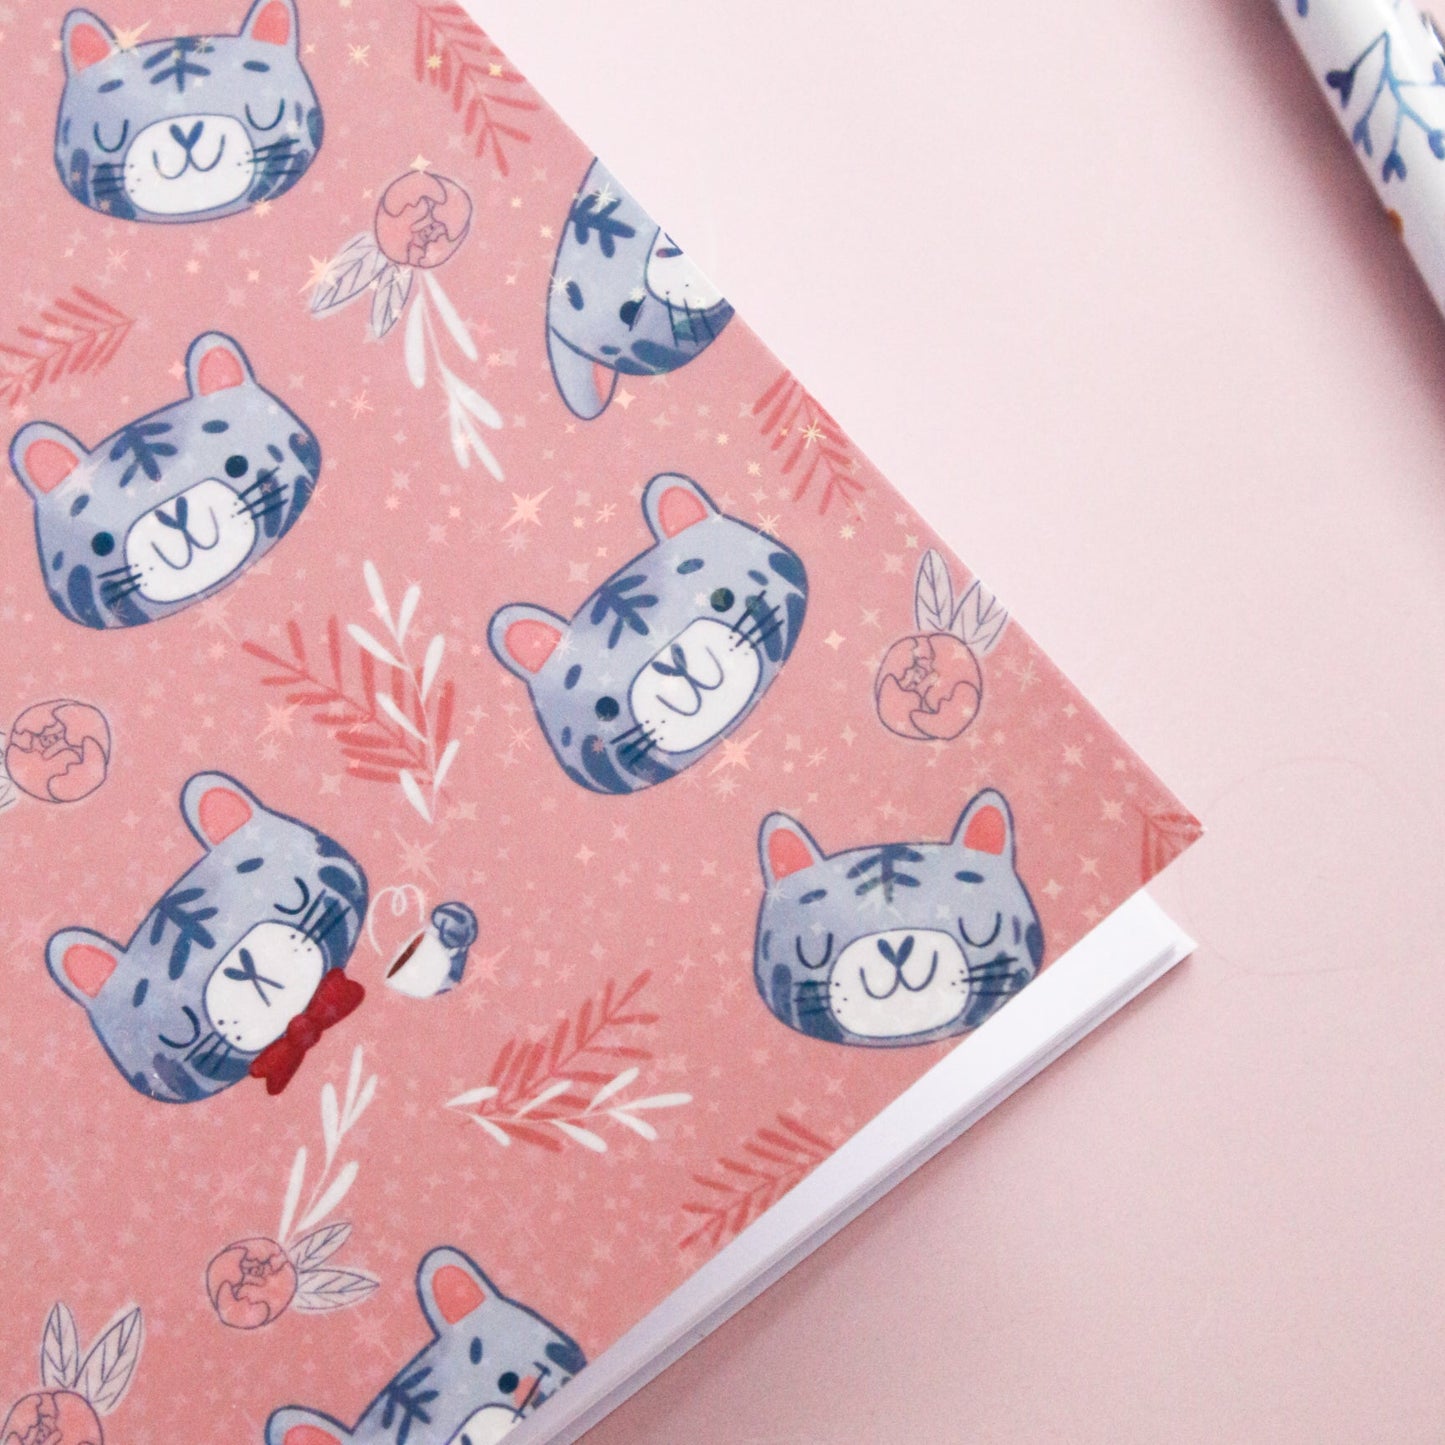 DISCONTINUED - Tiger Holographic Notebook - Cute notebooks